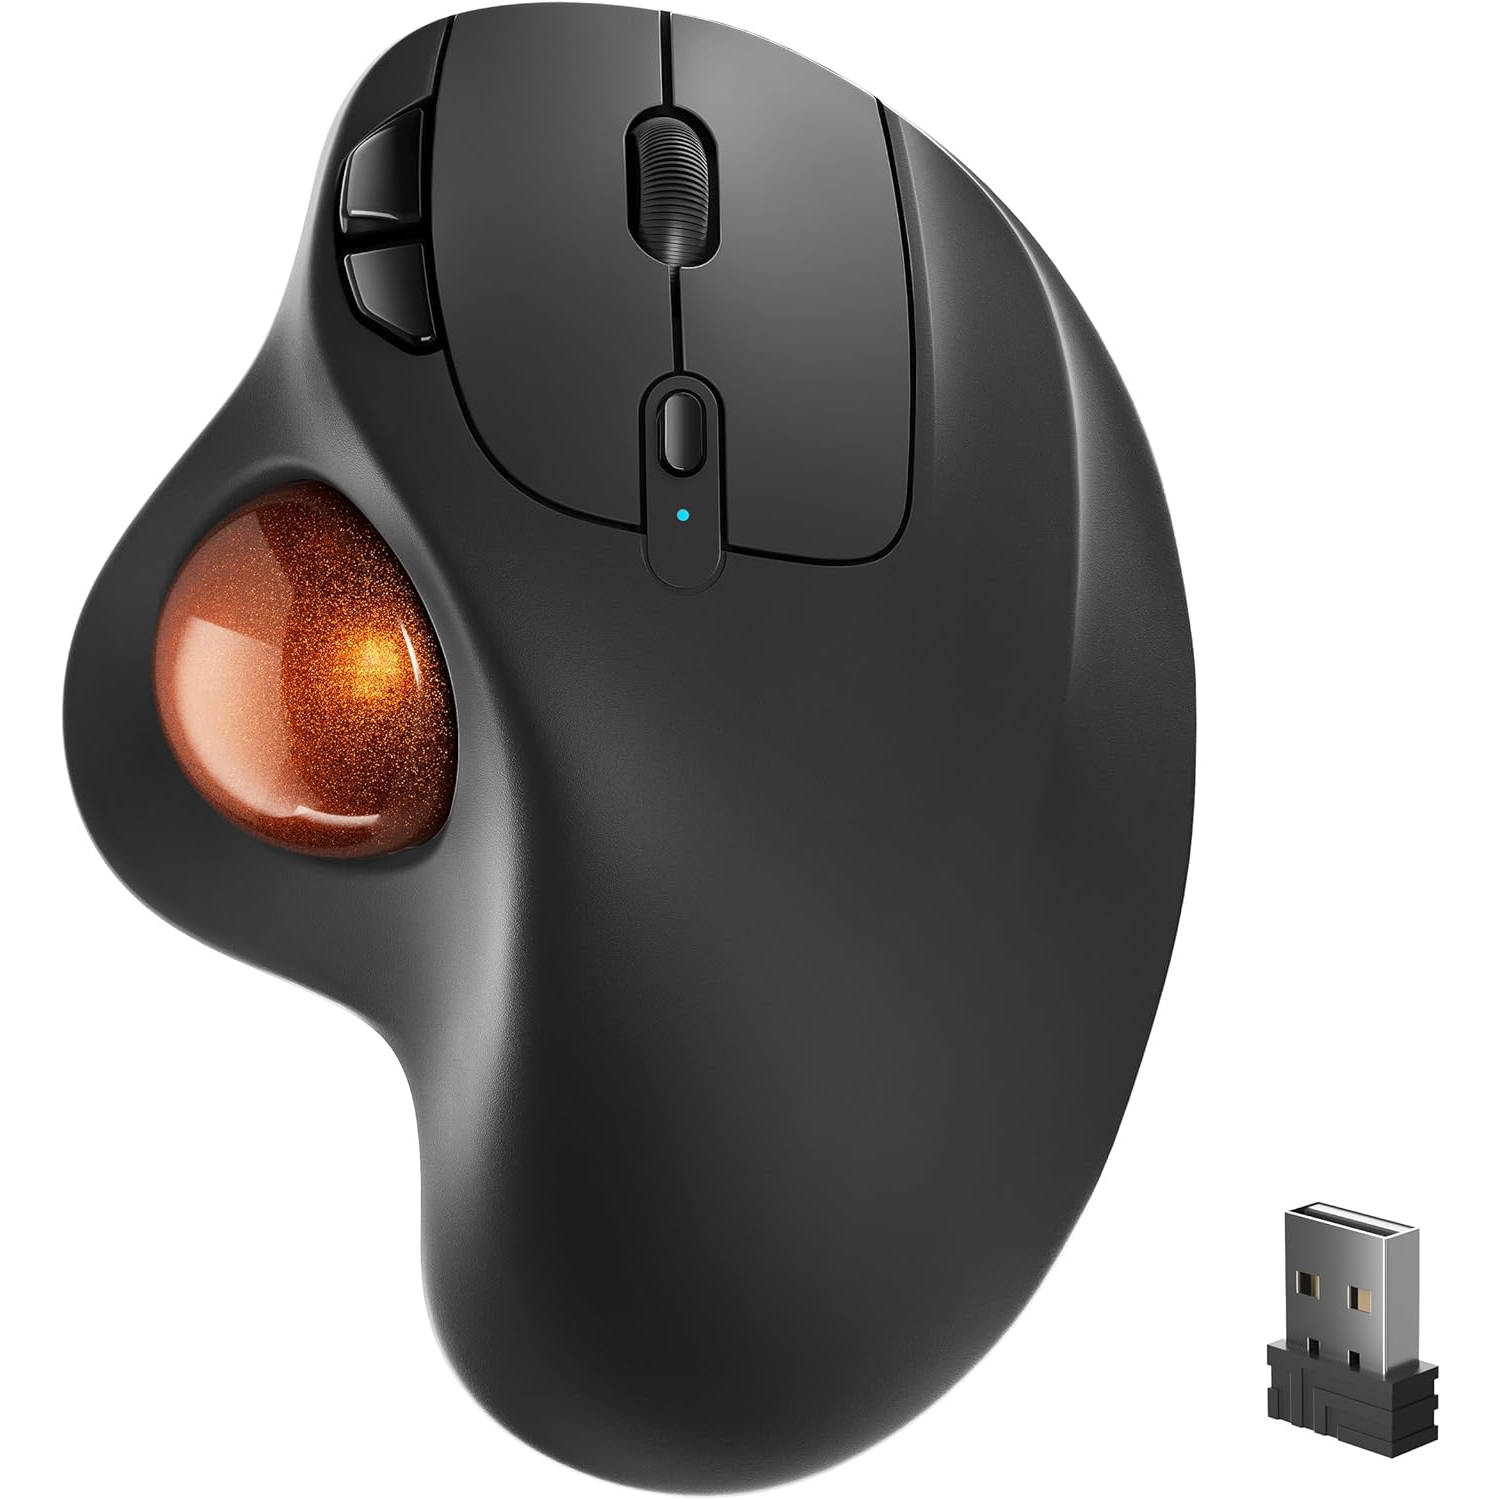 Wireless Trackball Mouse, Rechargeable Ergonomic Mouse, Easy Thumb Control, Precise & Smooth Tracking, 3 Device Connection (Bluetooth or USB), Compatible for PC, Laptop, iPad, Mac